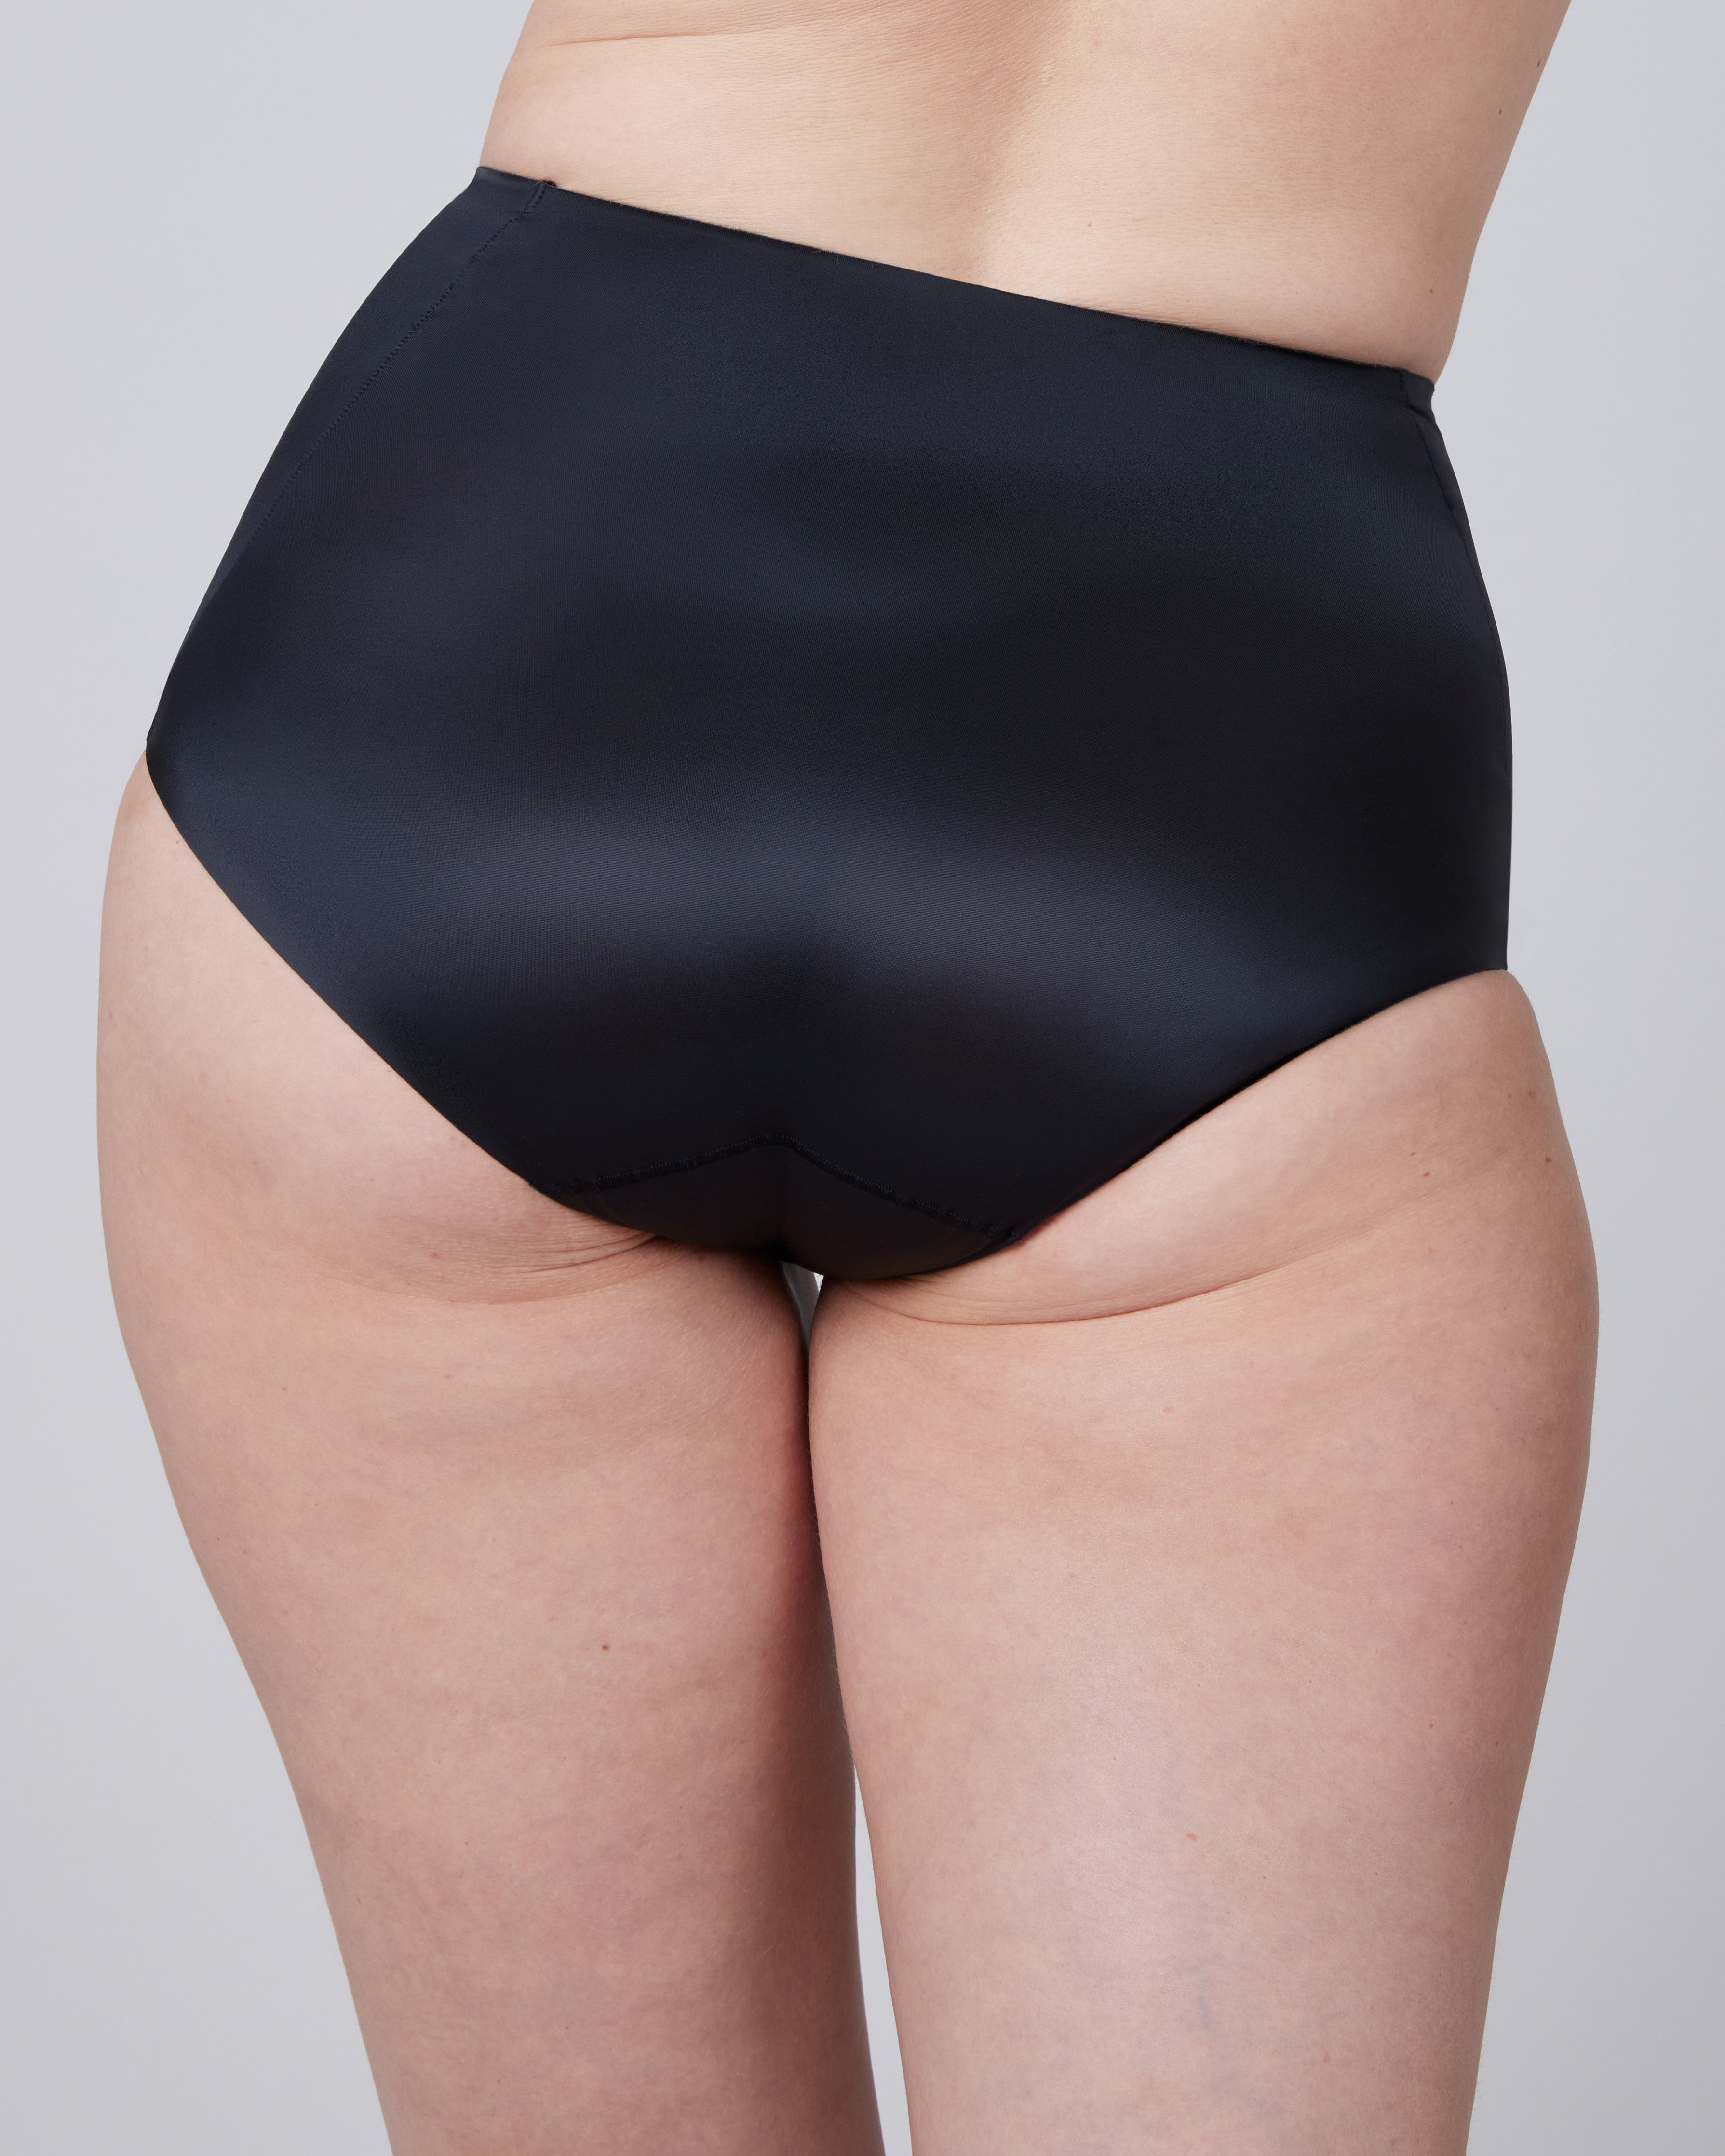 Spanx Shaping Satin Briefs In Very Black